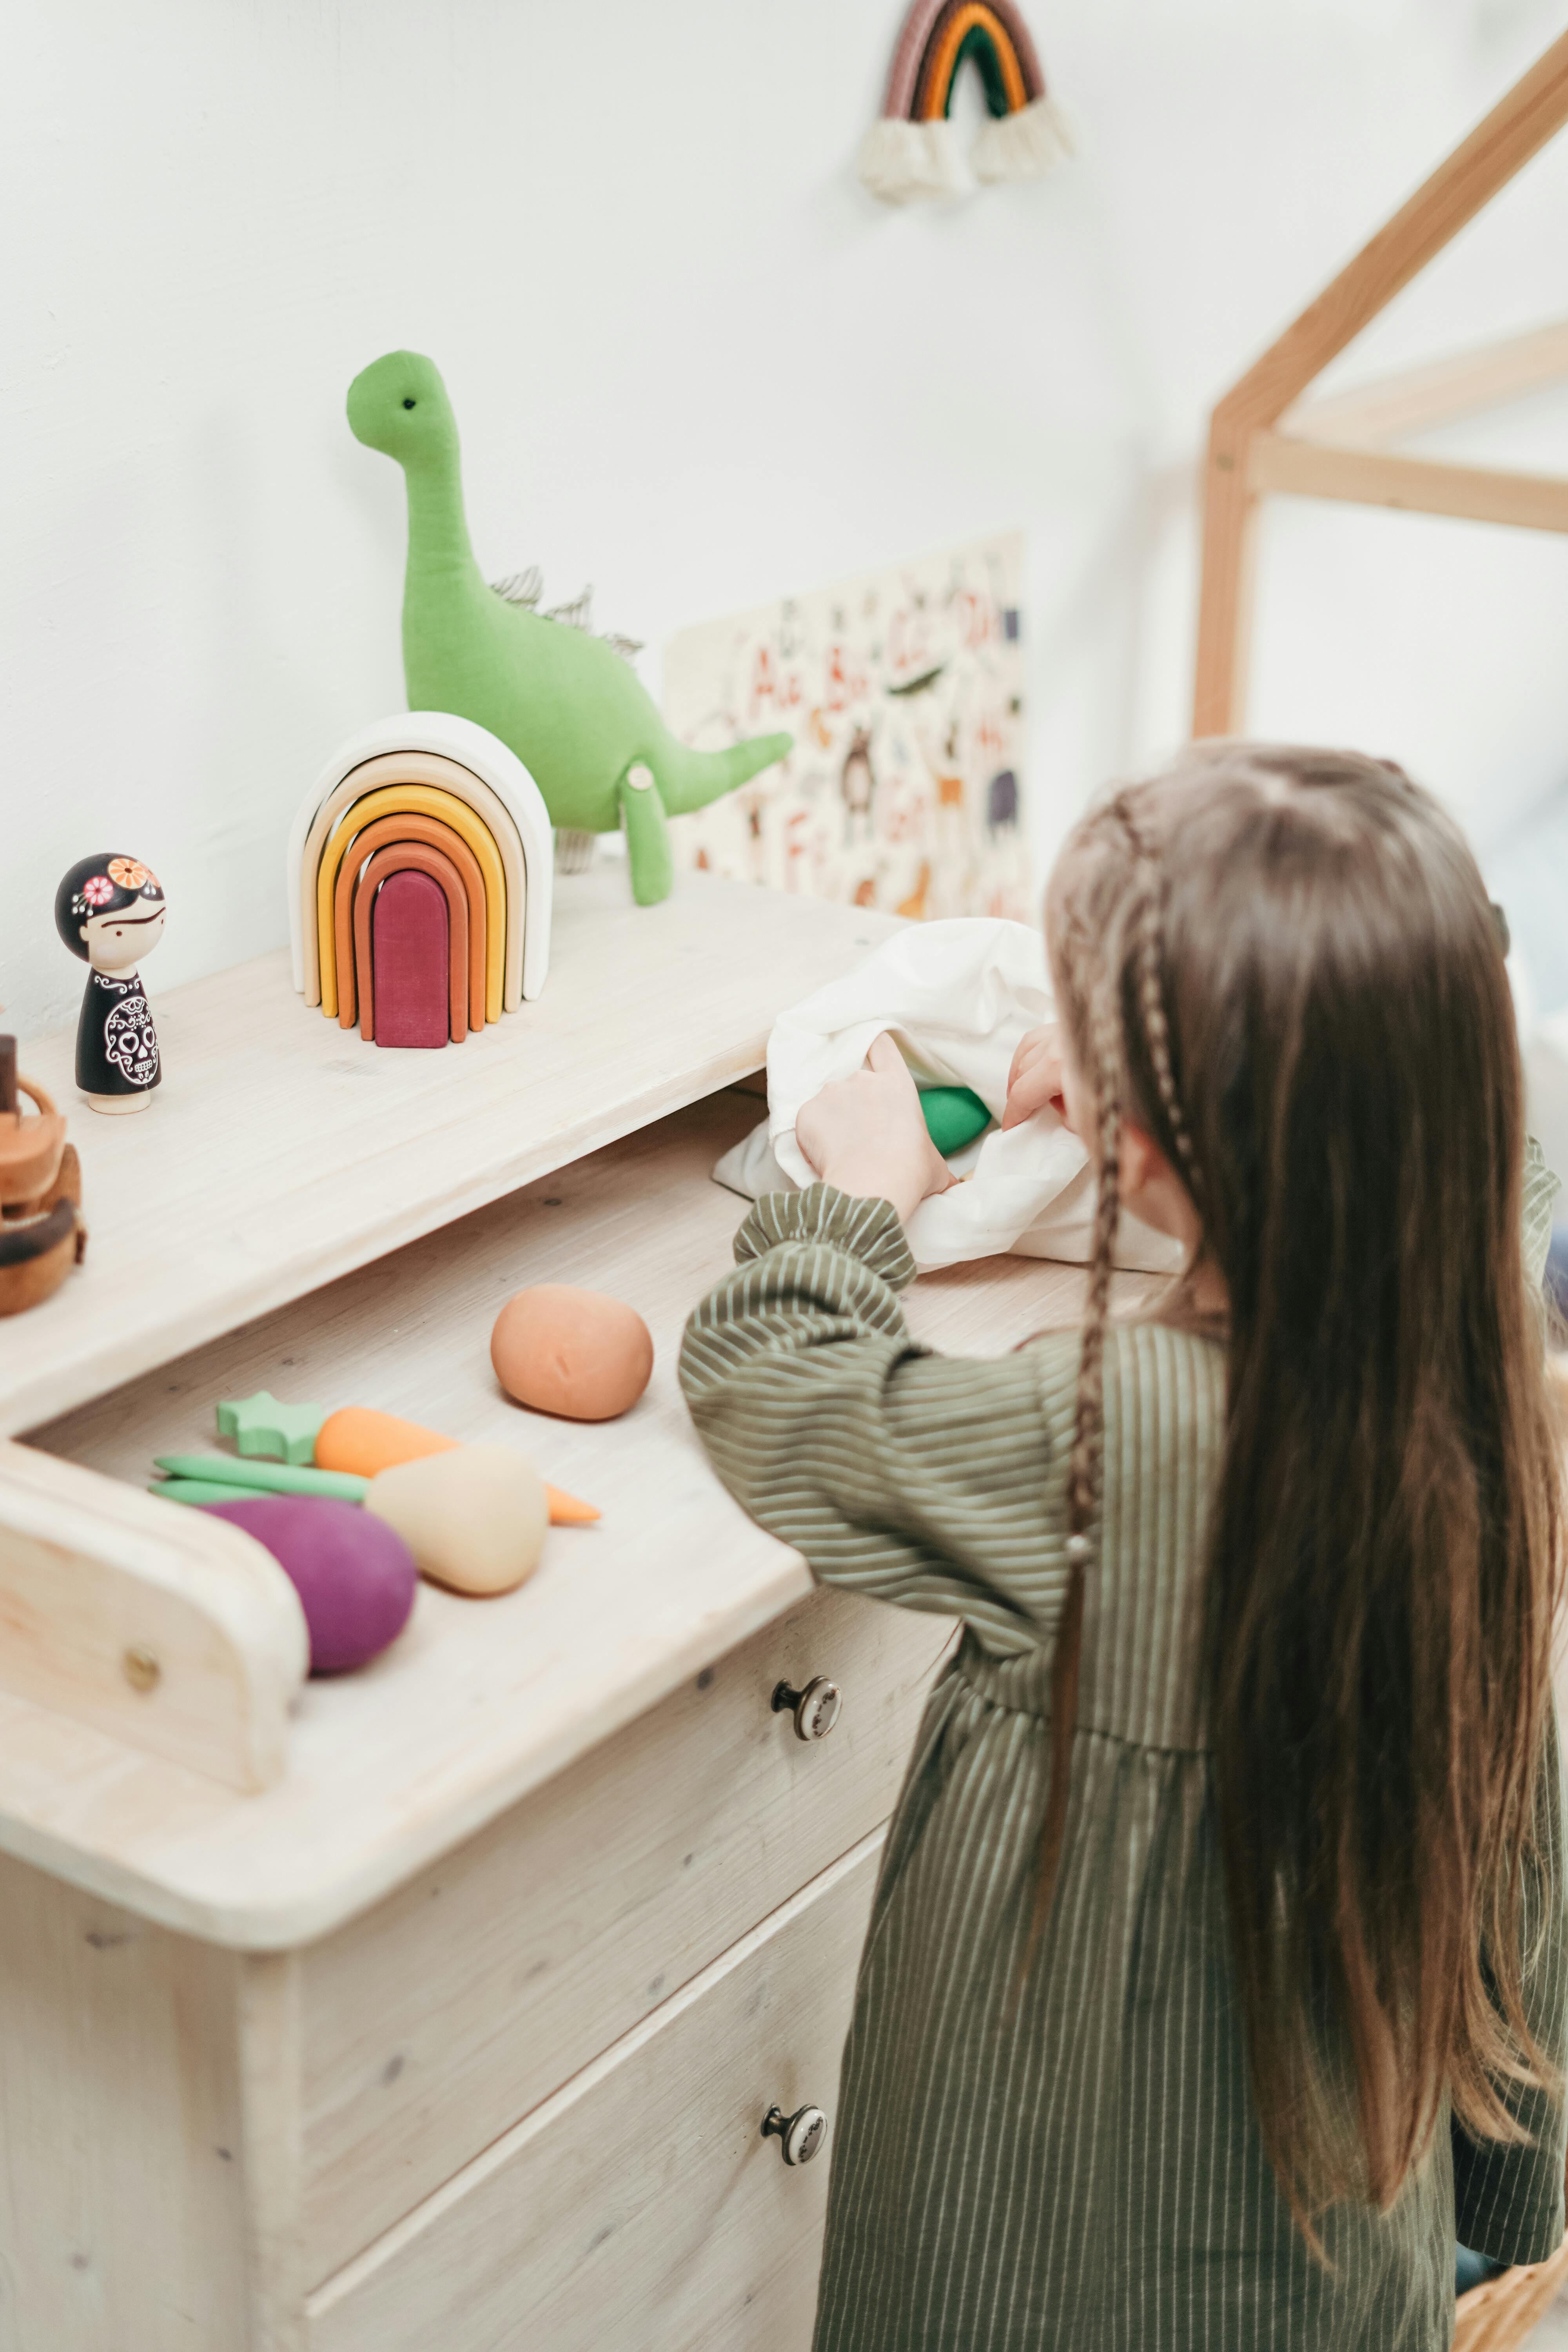 Girl playing with her toys | Source: Pexels